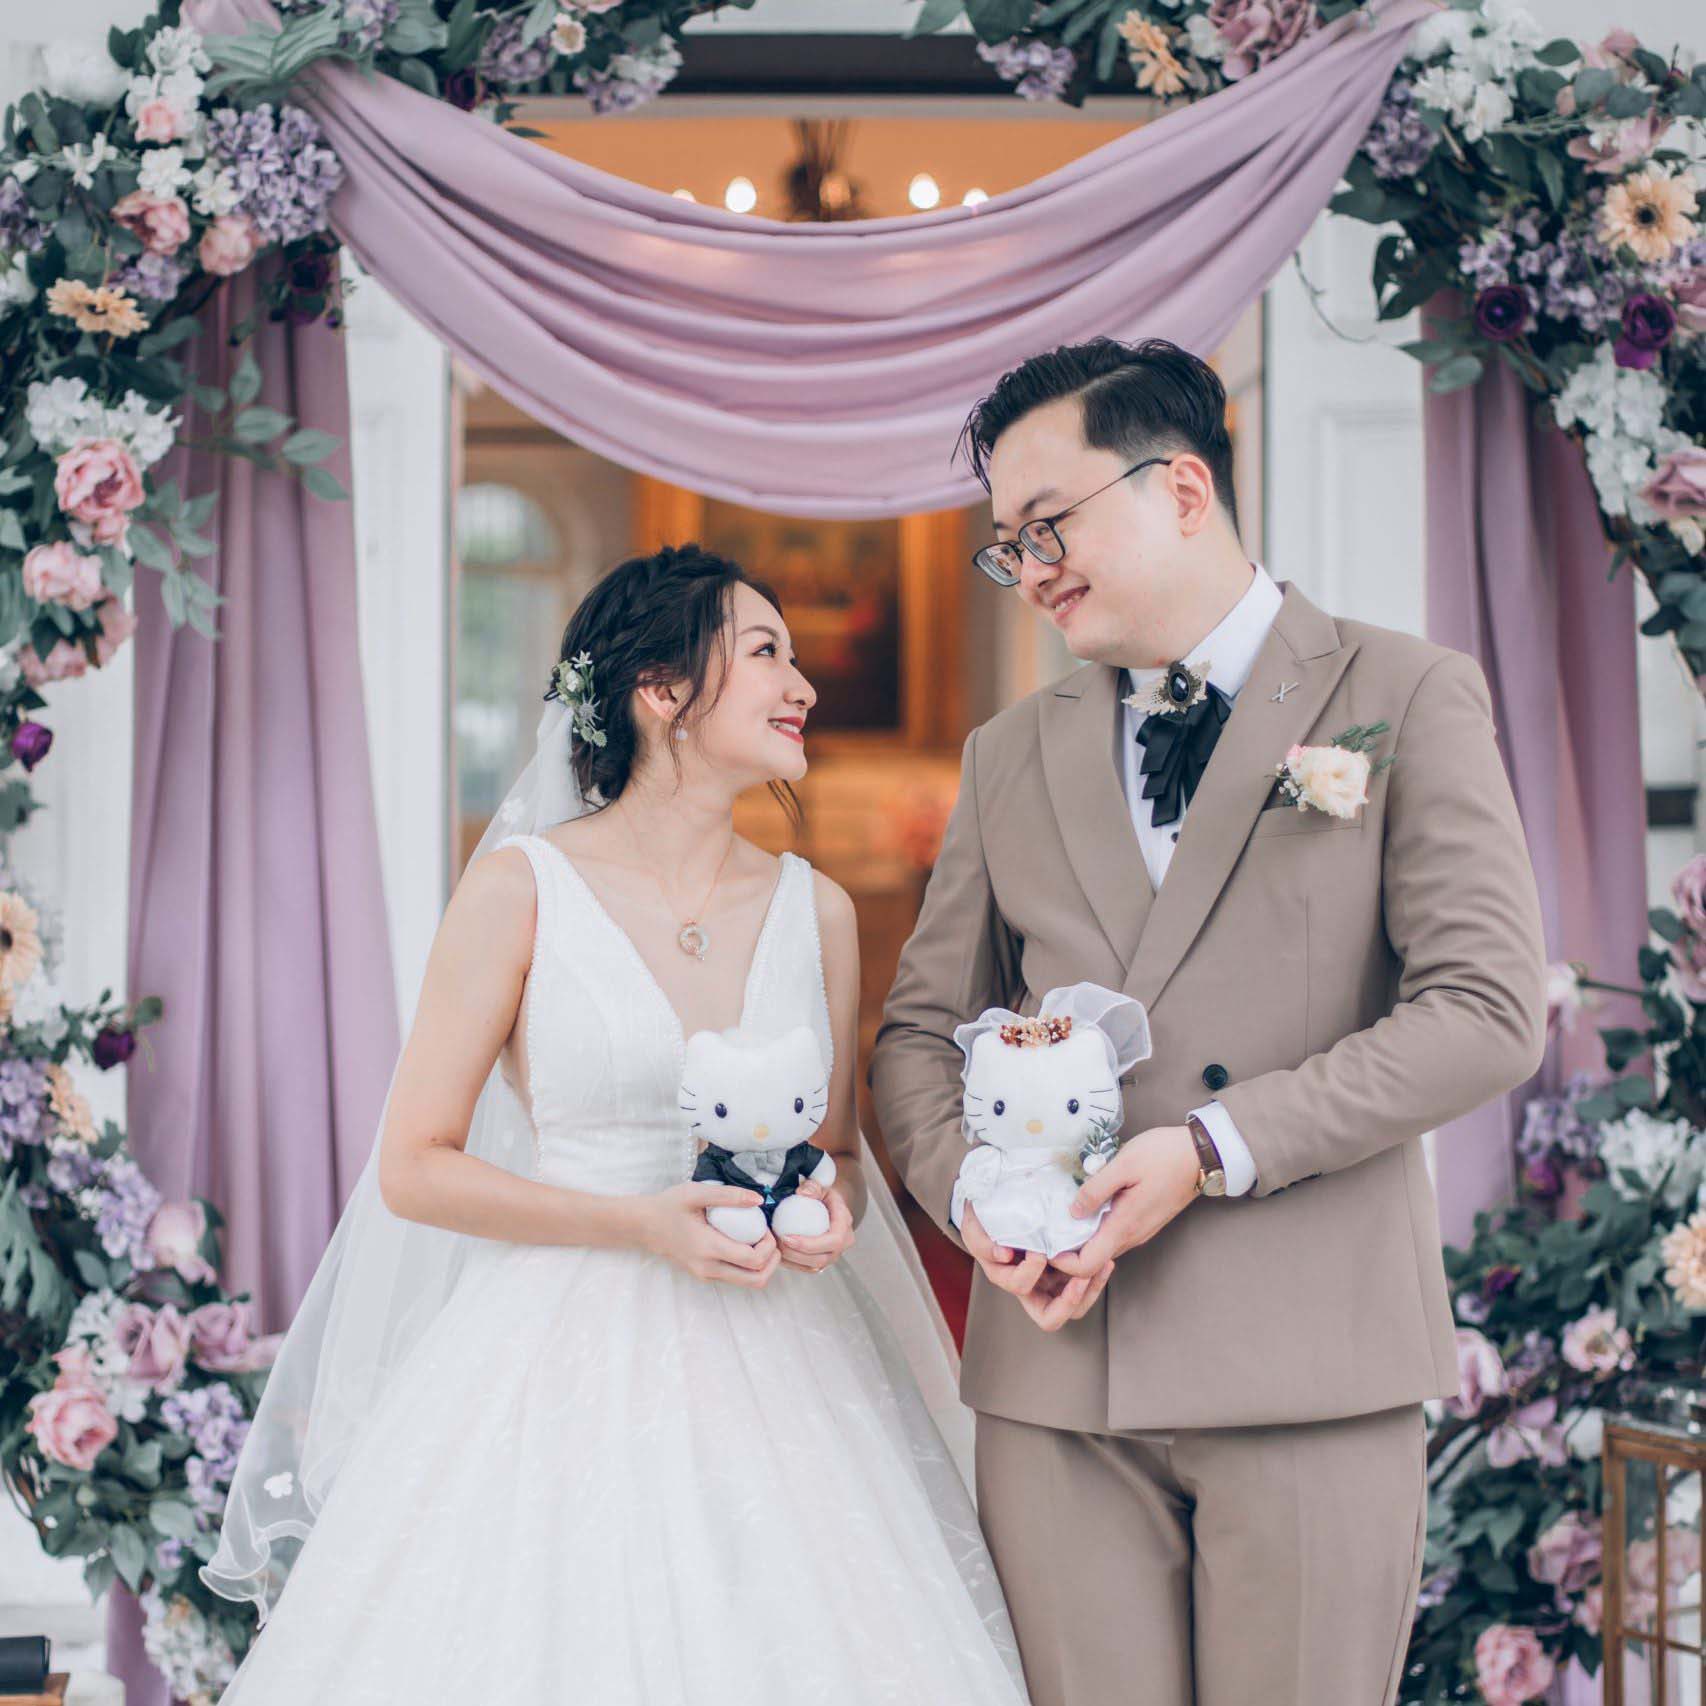 Groom and bride, looking at each other, hold a Hello Kitty plush toy